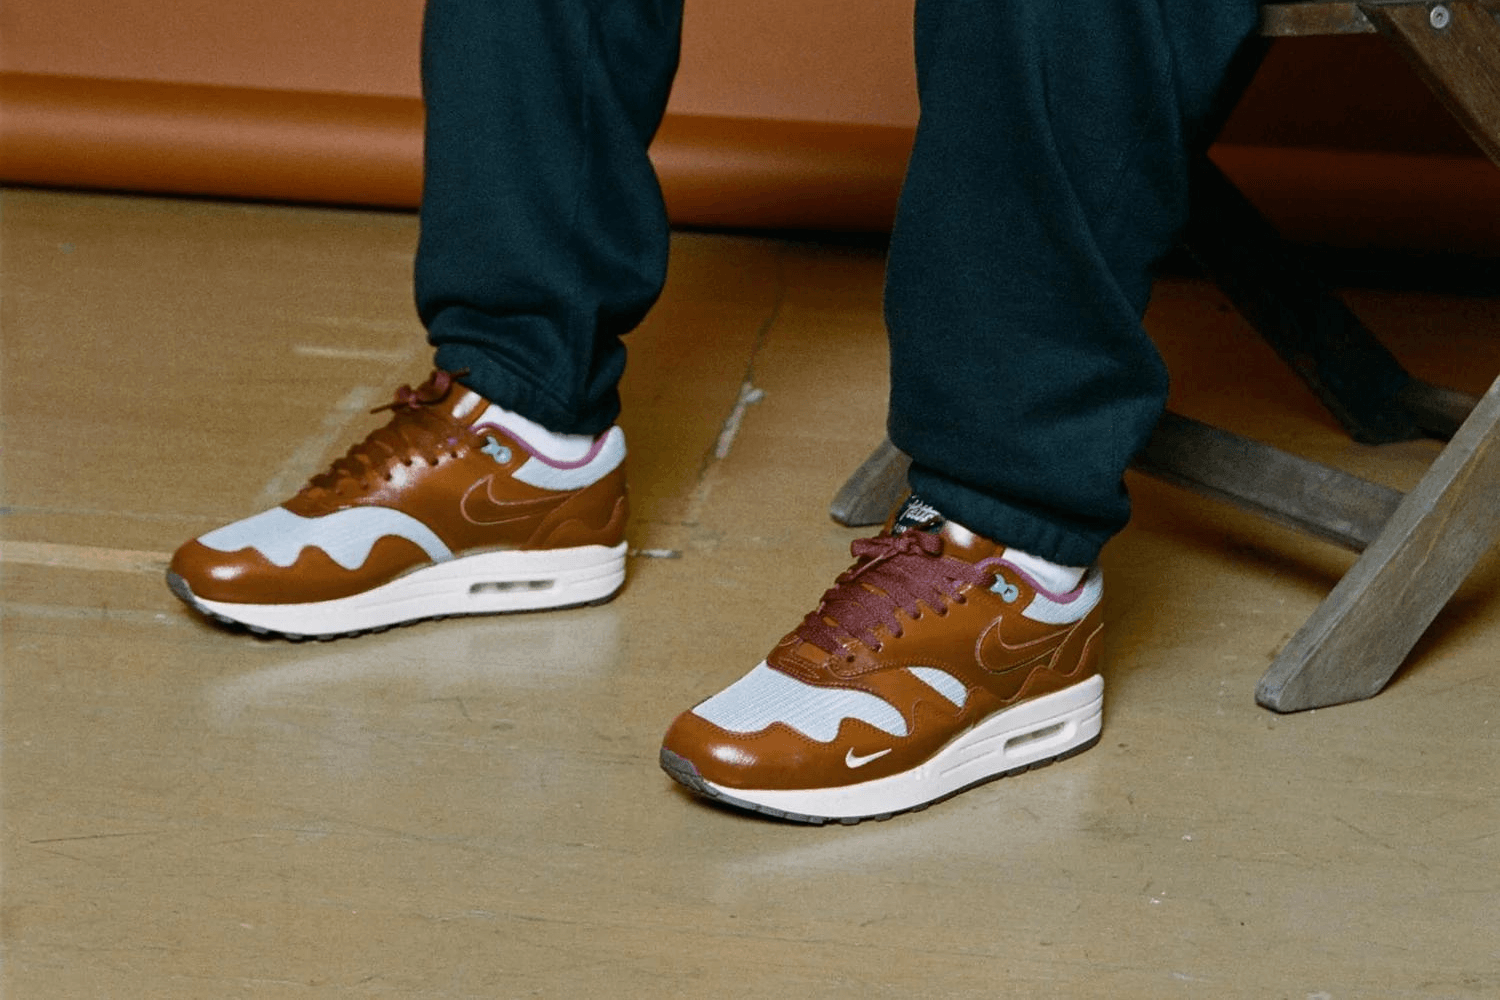 Nike and Patta launch 'The Next Wave' in August 2022